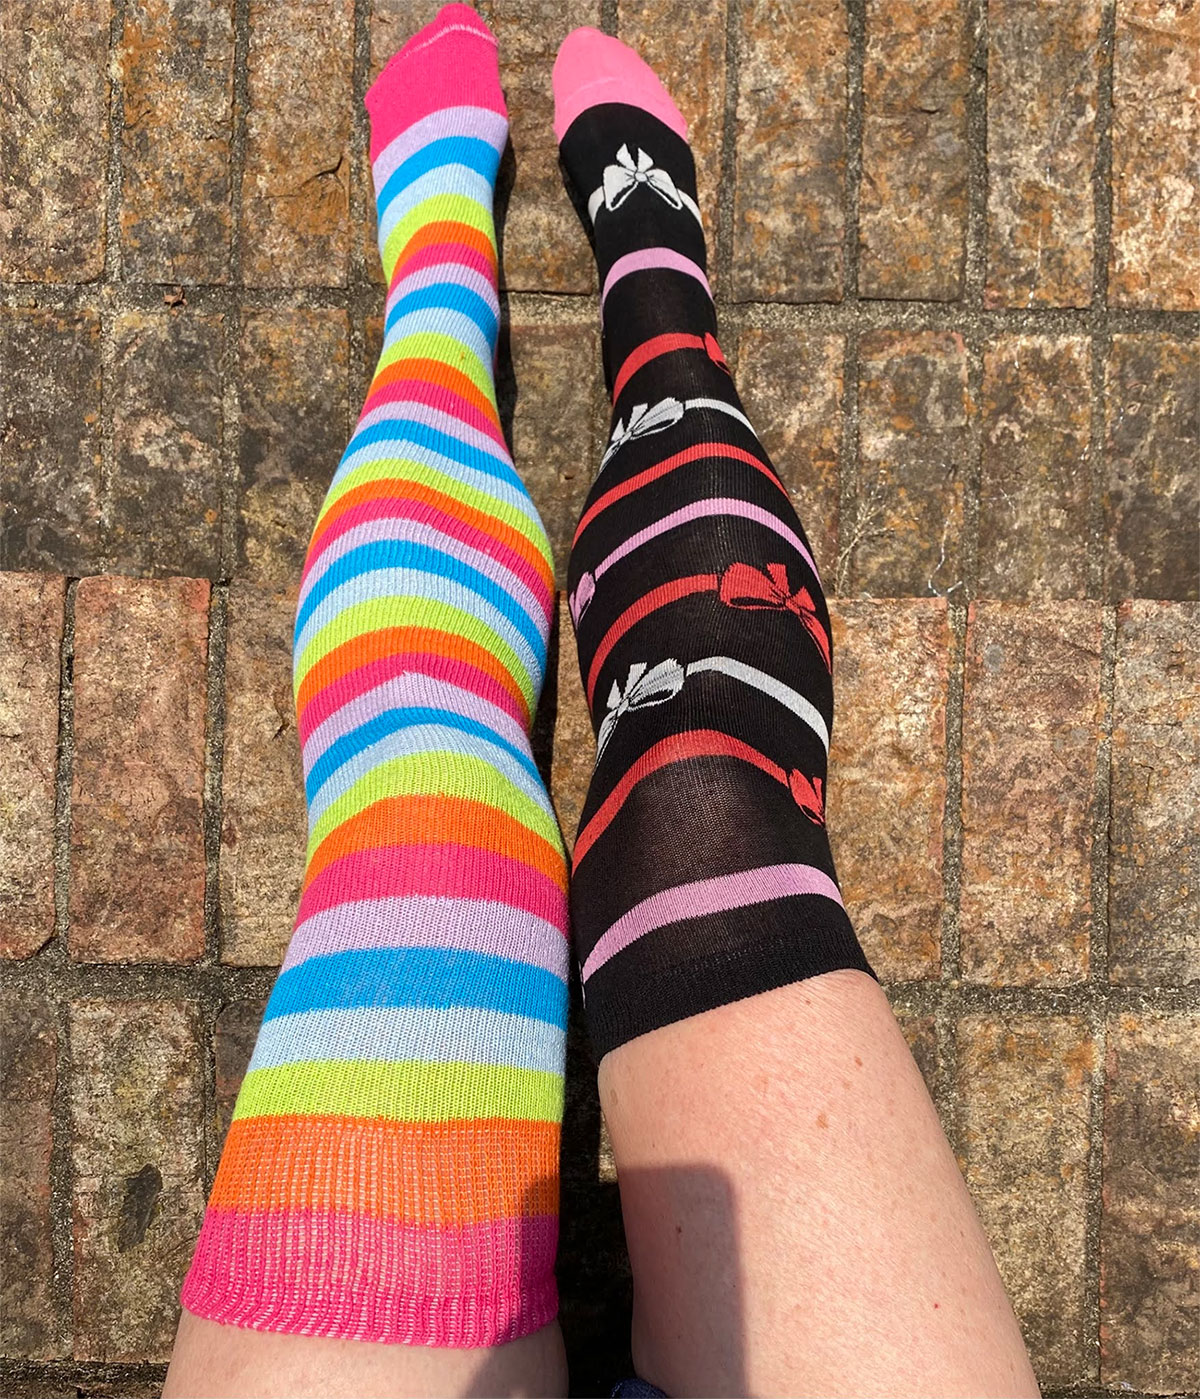 2 different pairs of socks, one long rainbow striped thigh high and the other a knee high socks with bow and ribbon creating a unique look